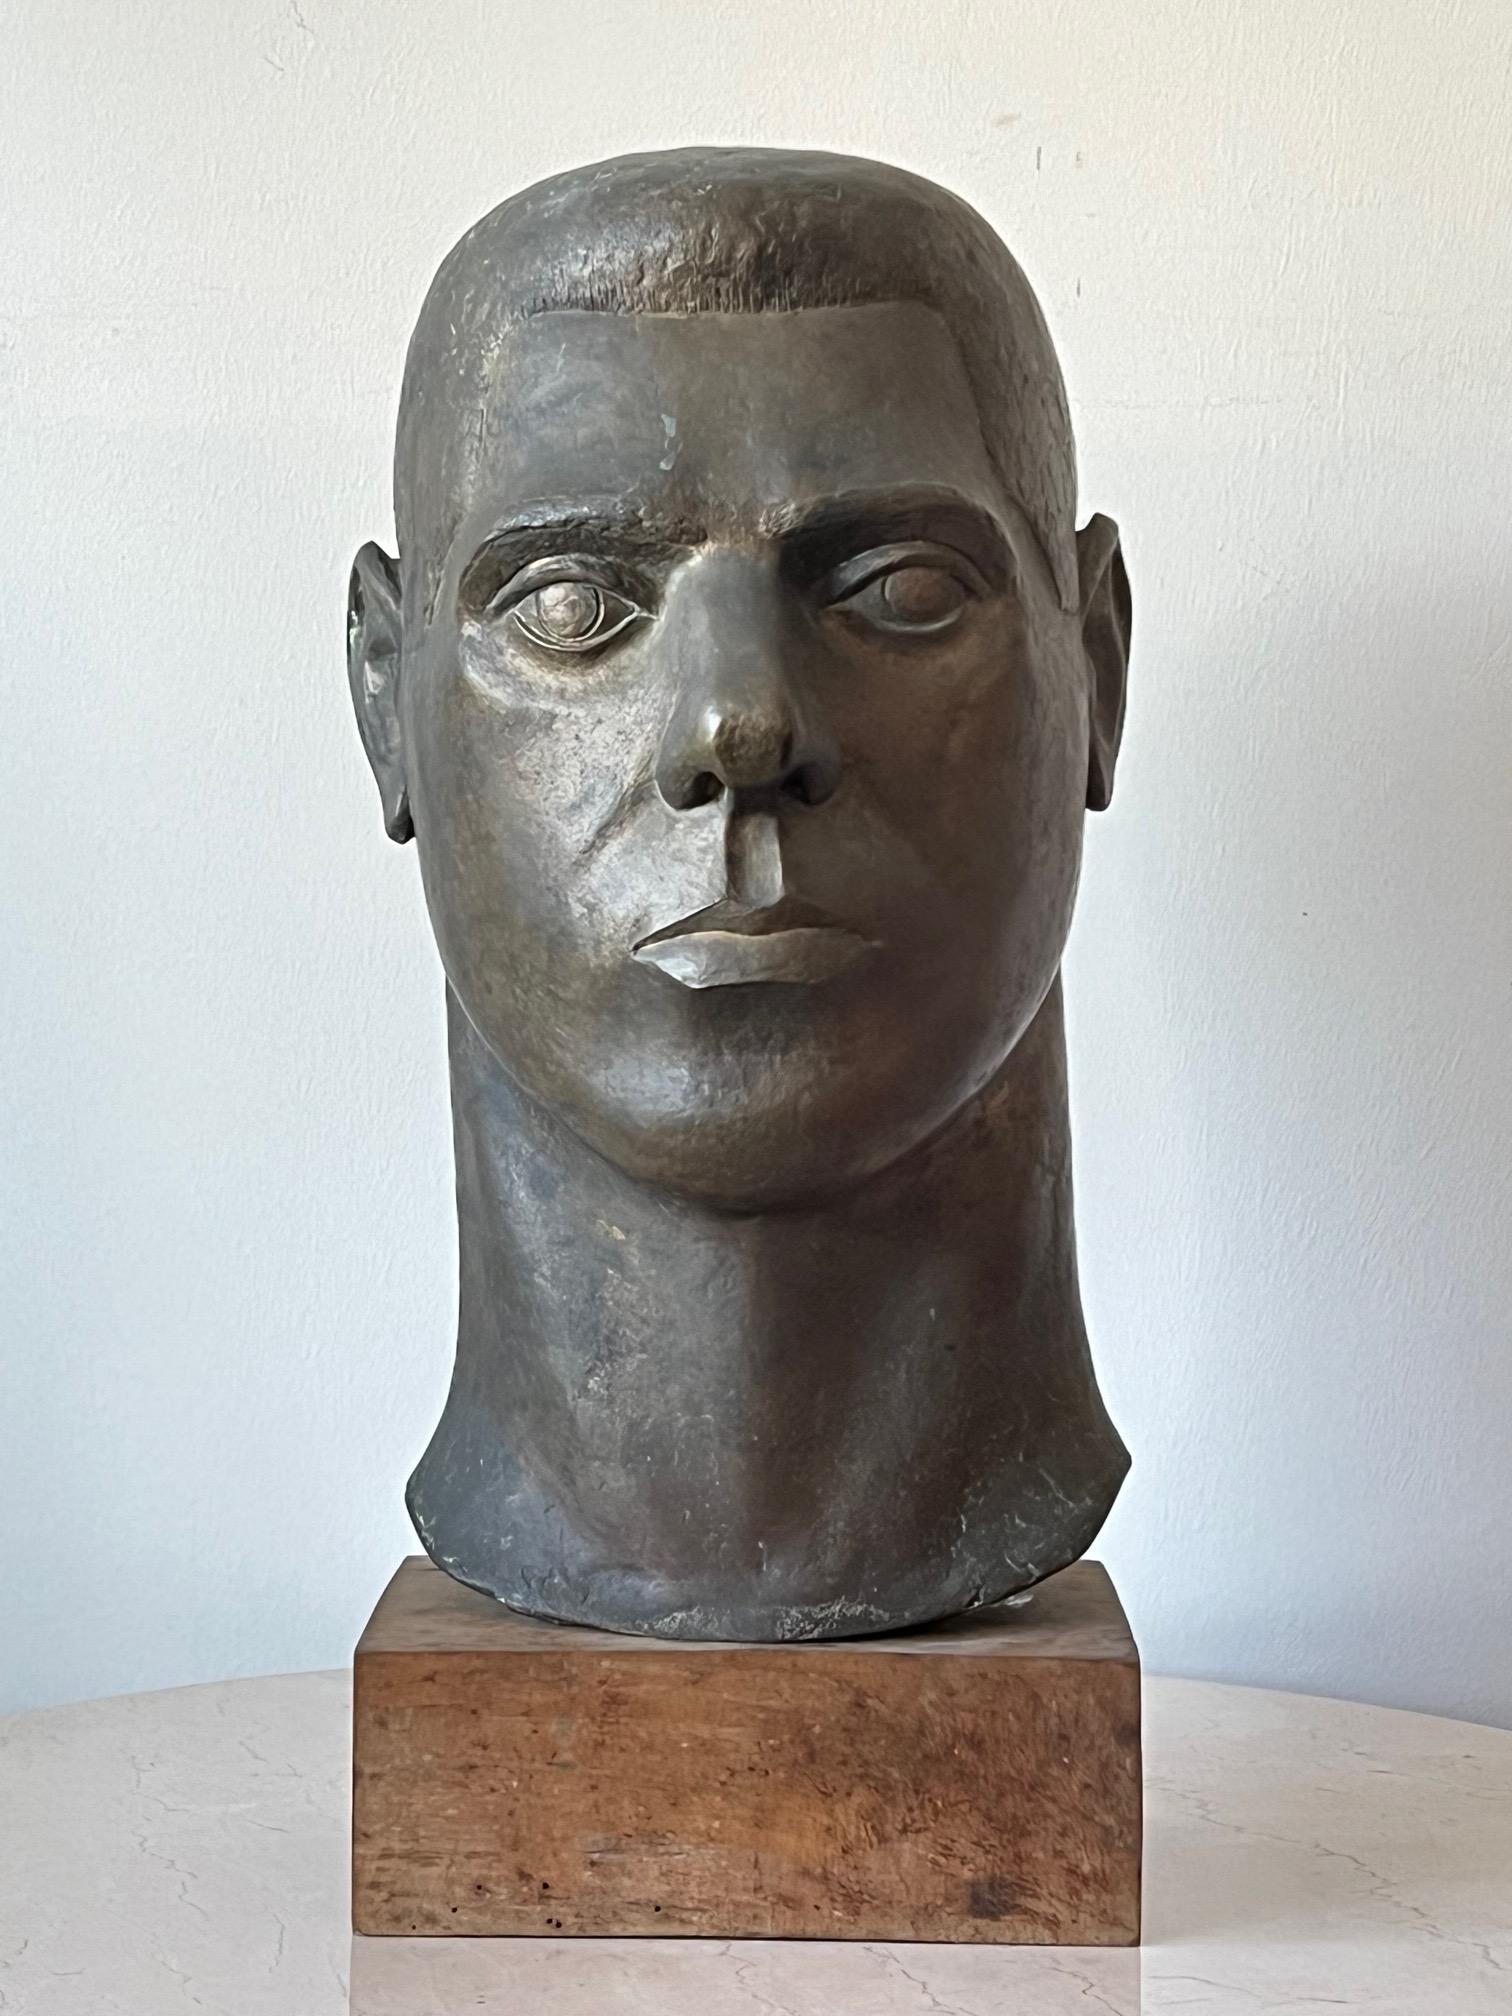 An unusual, life size, stylized, cast bronze sculpture by Anne Van Kleeck. From the artist's estate. A note about the artist: Anne Van Kleeck was primarily known for her works in cast bronze and ceramics. She attended Ohio Wesleyan University (B.A.)